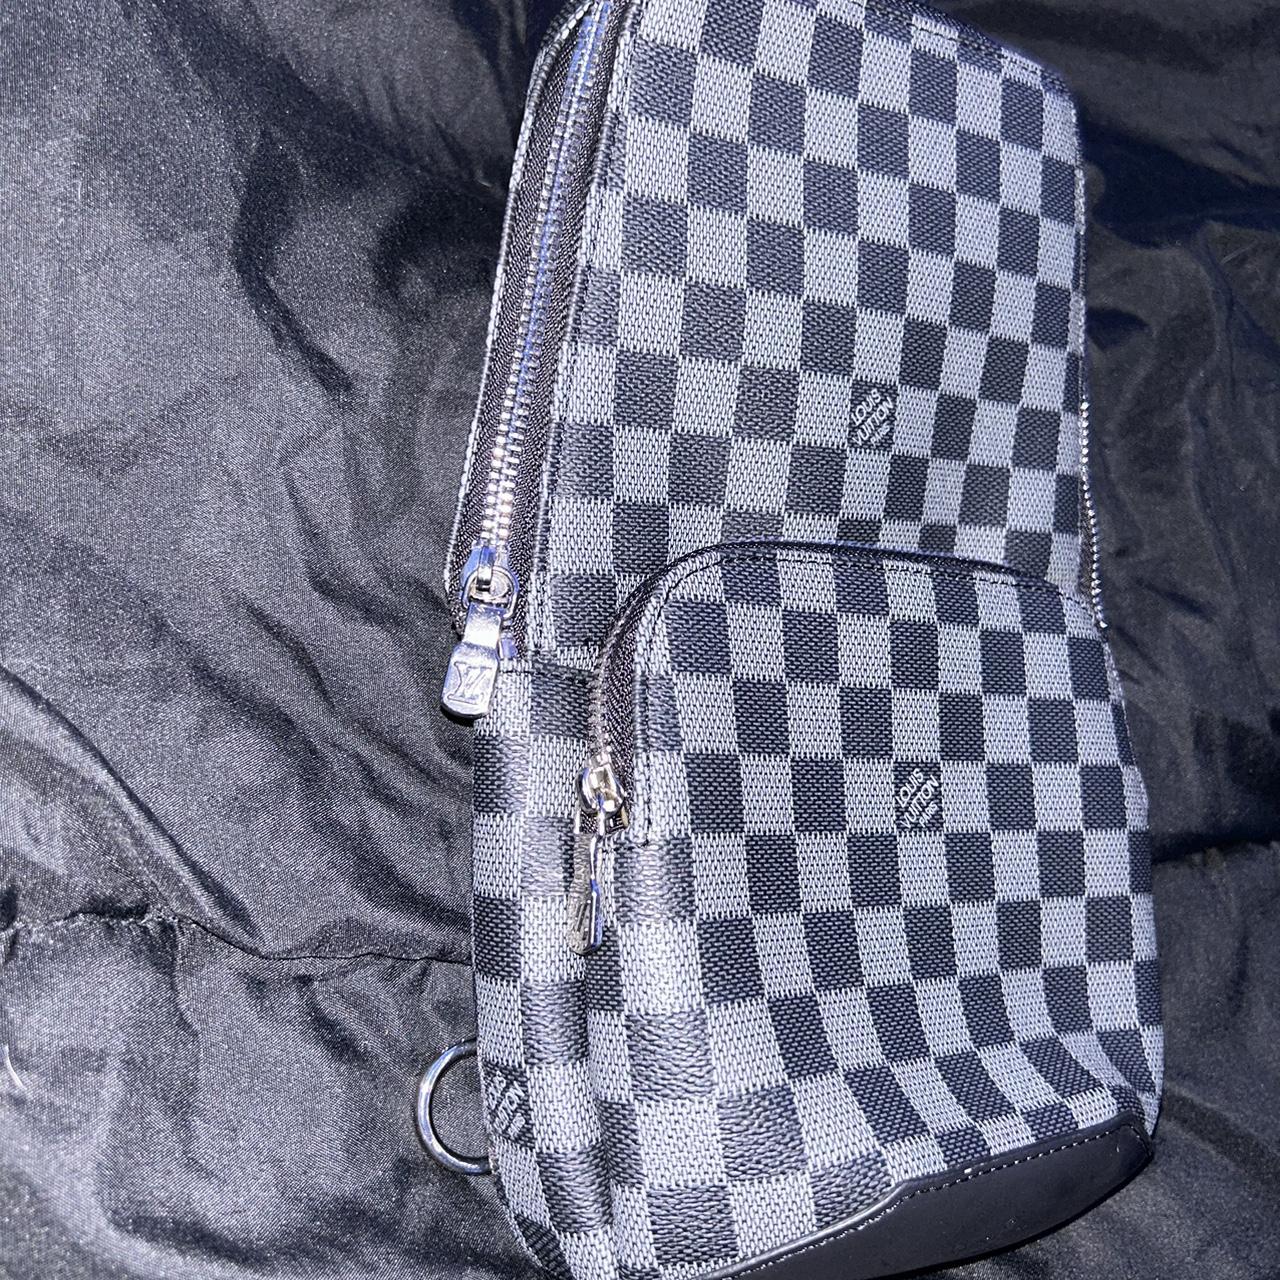 Brand new Louis Vuitton bag only used once. I got - Depop